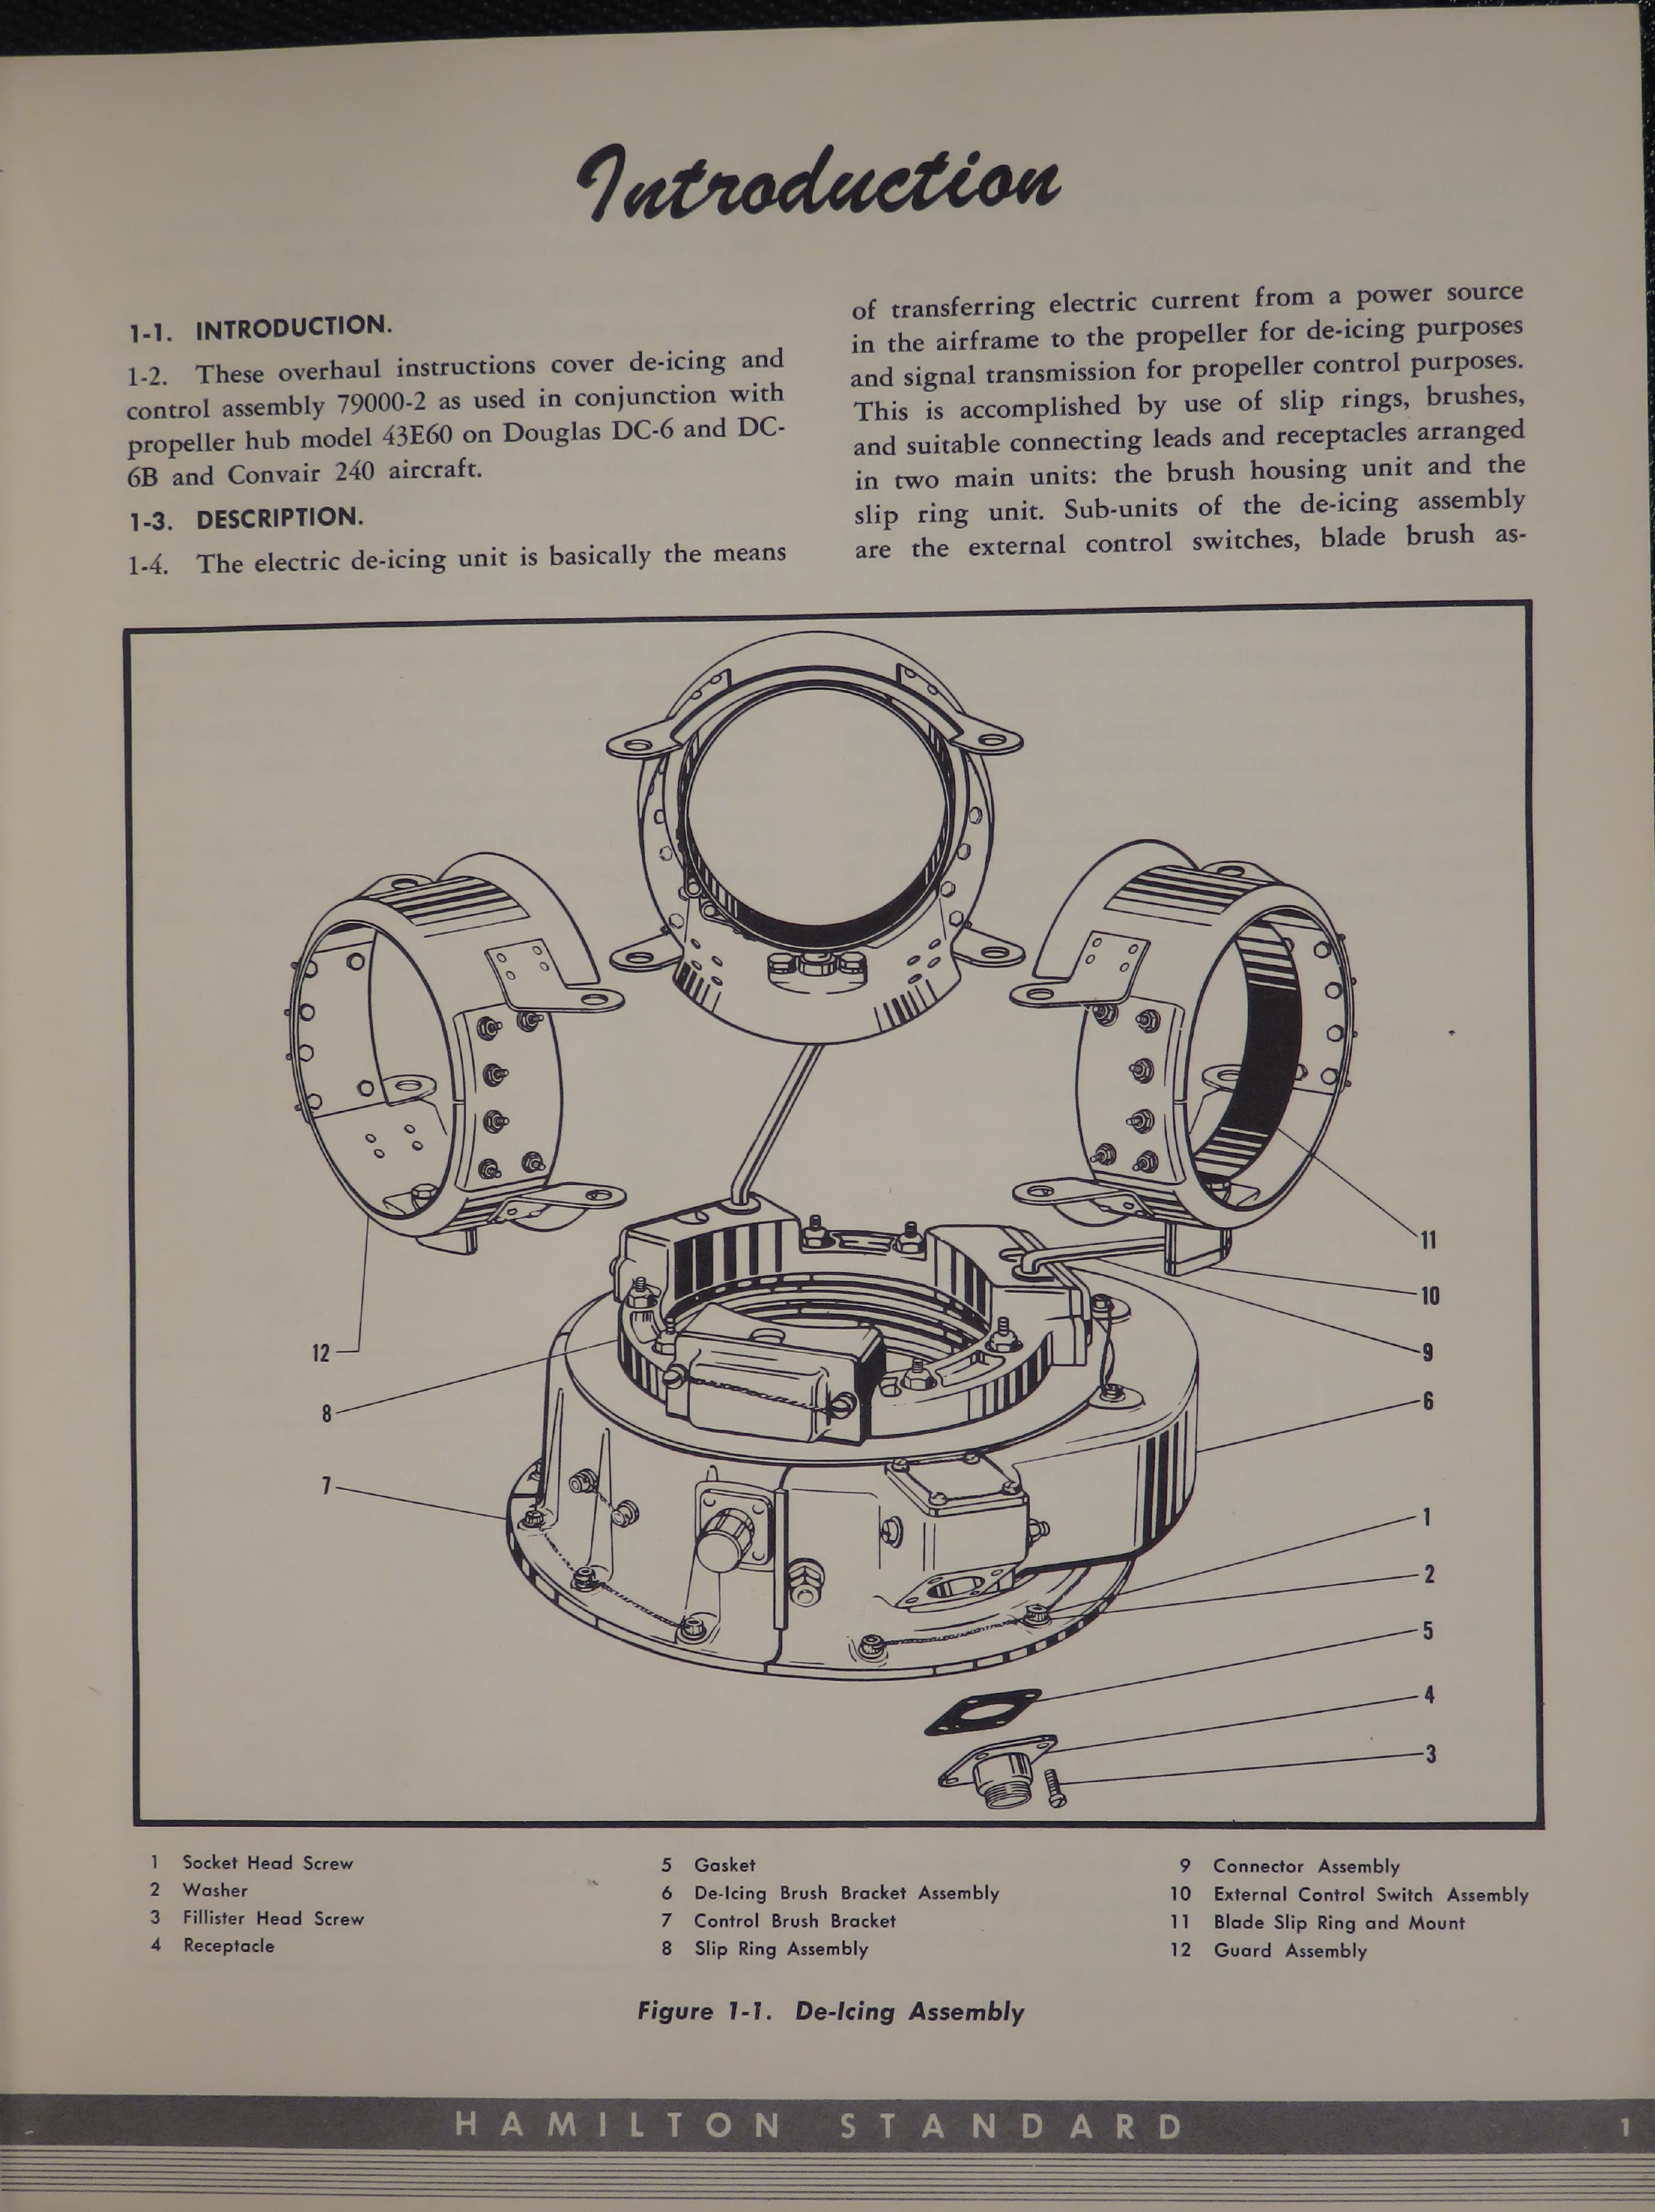 Sample page 7 from AirCorps Library document: Overhaul Manual for Hamilton Standard Model 43E60 Electric Deicing Assemblies